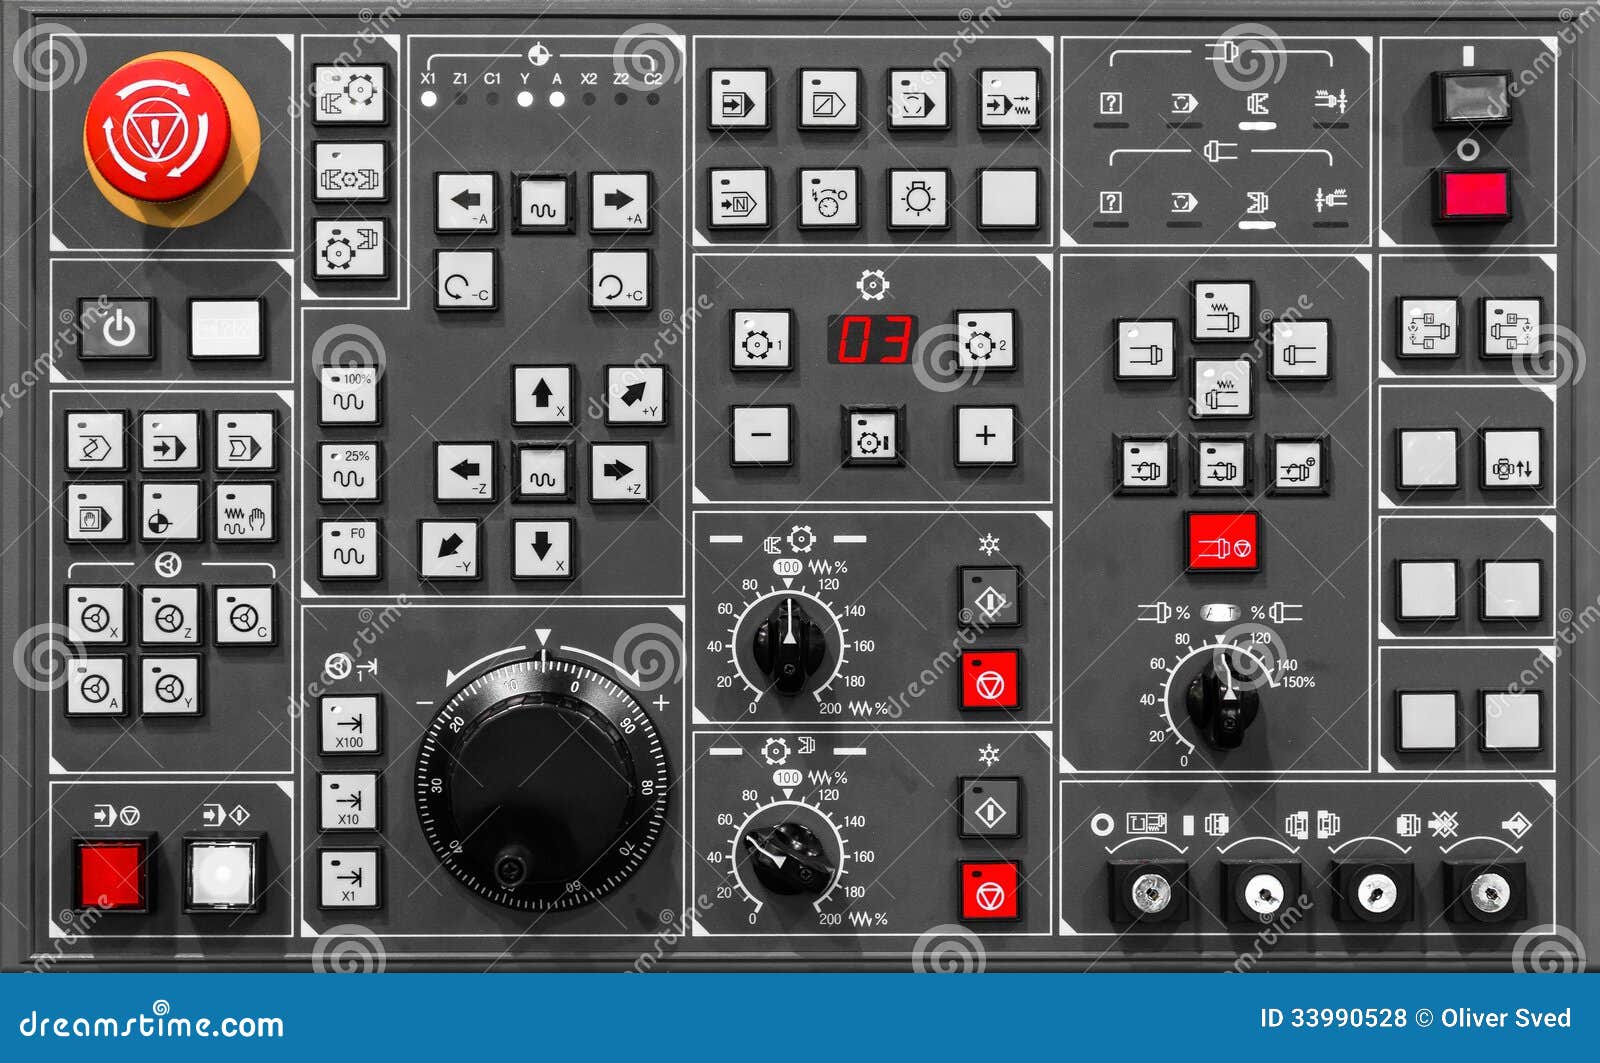 control-panel-texture-lots-buttons-33990528.jpg